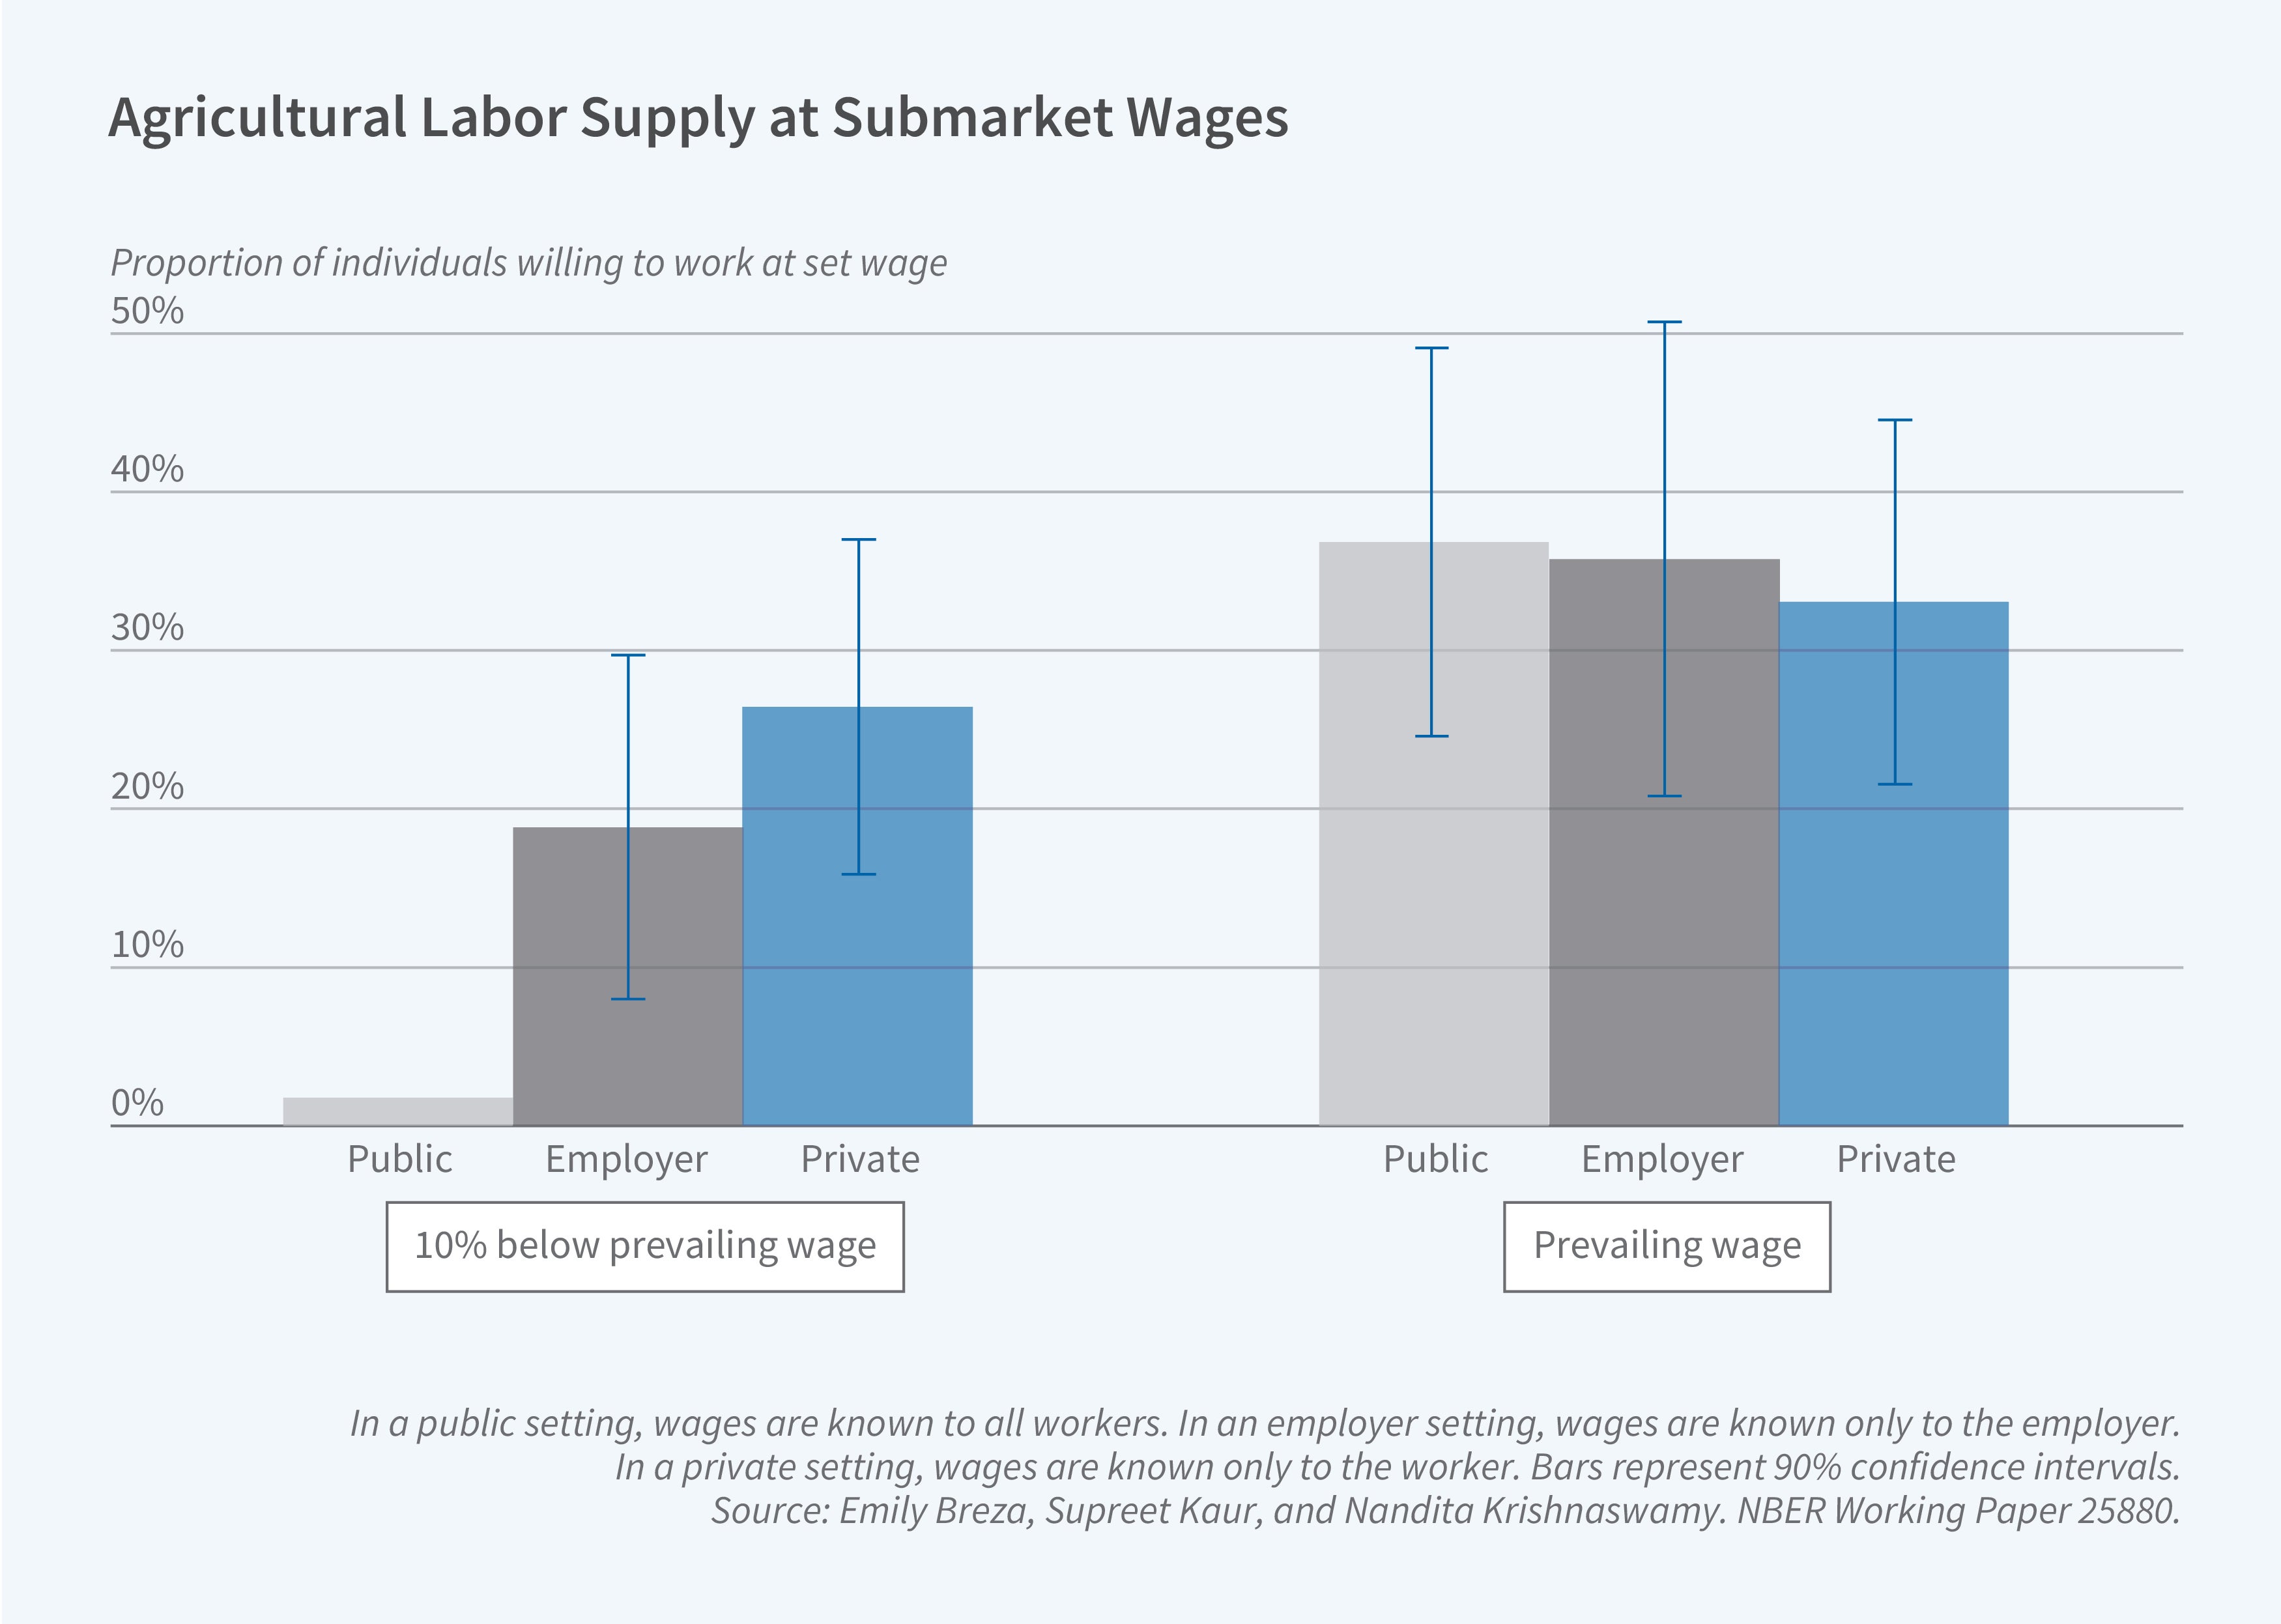 This figure is a bar graph titled, Agricultural Labor Supply at Submarket Wages. The y-axis is labeled, proportion of individuals willing to work at set wage. It ranges from 0 percent to 50 percent, increasing in increments of 10. The bar graph compares the acceptance rates of job offers at two different wage levels: 10% below the prevailing wage and at the prevailing wage. The acceptance rates are shown for three different contexts: public, employer, and private.  For job offers at 10% below the prevailing wage, the acceptance rates are relatively low across all three contexts. The public acceptance rate is the lowest at around 3%, followed by the employer acceptance rate at about 18%, and the private acceptance rate at approximately 25%. In contrast, for job offers at the prevailing wage, the acceptance rates are much higher and more similar across the three contexts. The public acceptance rate is about 36%, the employer acceptance rate is around 35%, and the private acceptance rate is approximately 32%.The note on the figure reads, In a public setting, wages are known to all workers. In an employer setting, wages are known only to the employer. In a private setting, wages are known only to the worker. Bars represent 90% confidence intervals. The source line reads, Source: Emily Breza, Supreet Kaur, and Nandita Krishnaswamy. NBER Working Paper 25880.